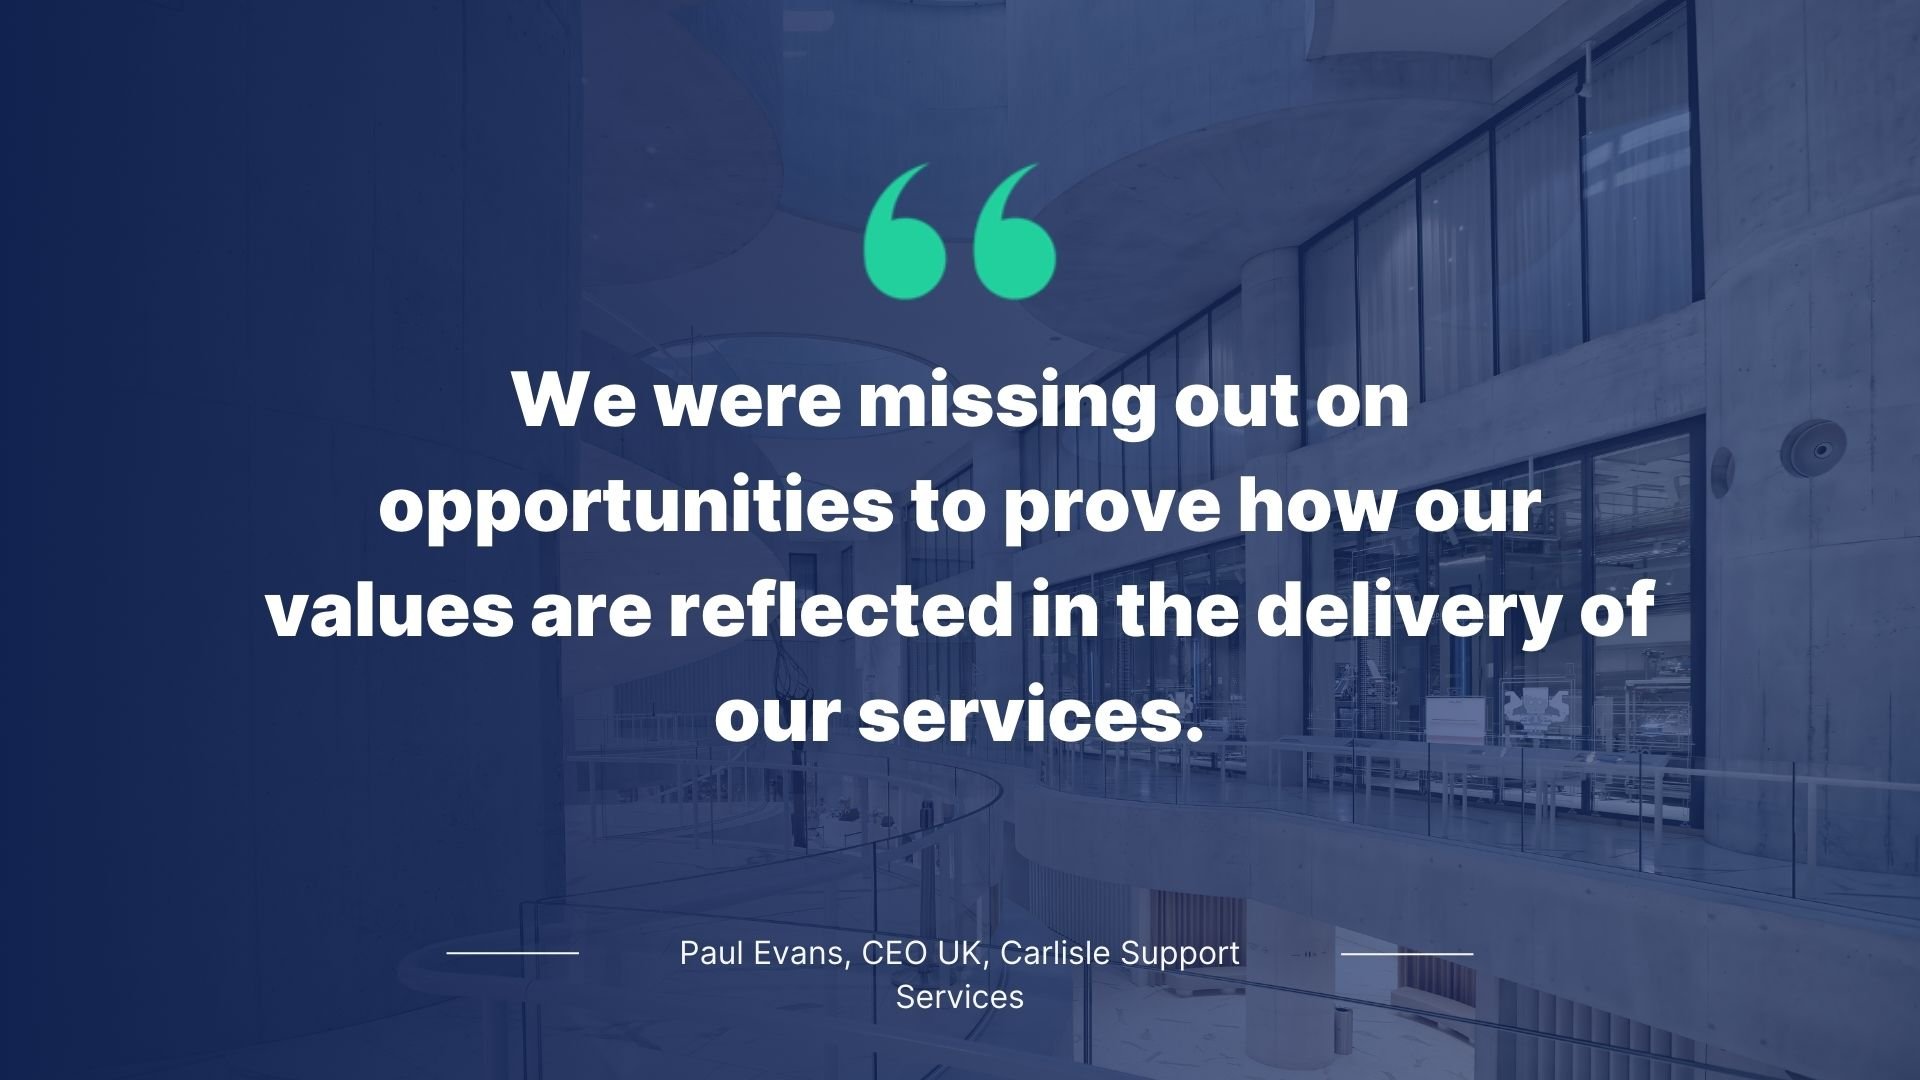 Quote by Paul Evans, CEO, Carlisle Support Services: We were missing out on opportunities to prove how our values are reflected in the delivery of our services.